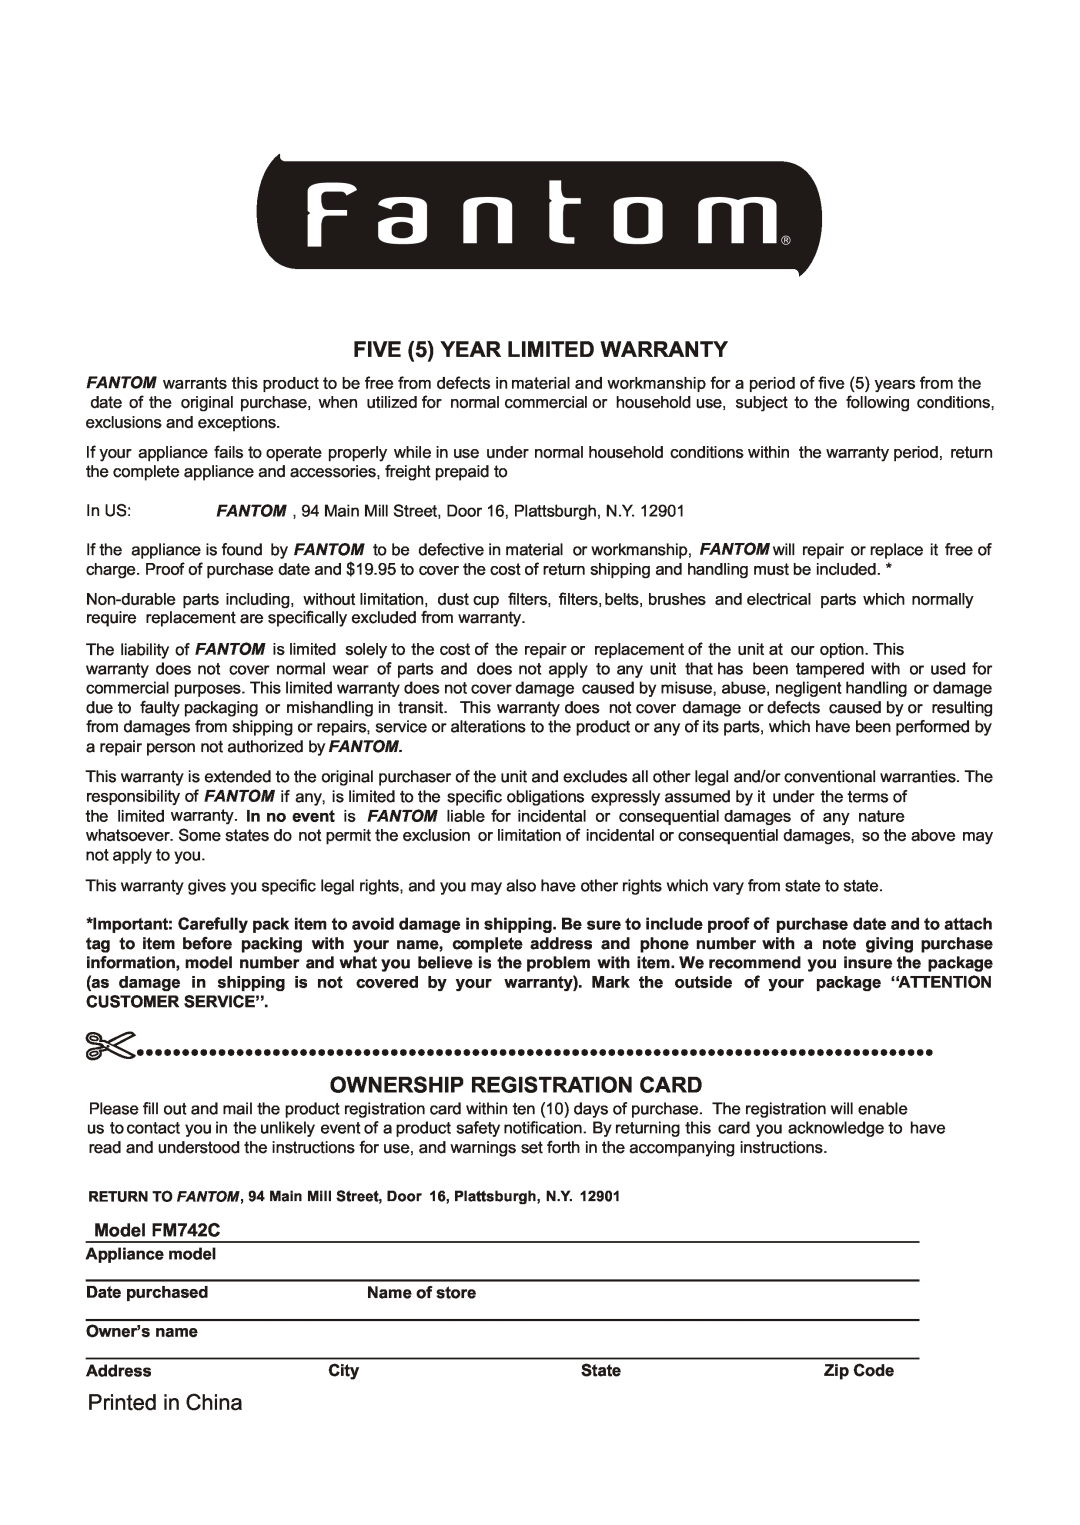 Fantom Vacuum FIVE 5 YEAR LIMITED WARRANTY, Ownership Registration Card, Printed in China, Model FM742C, Date purchased 